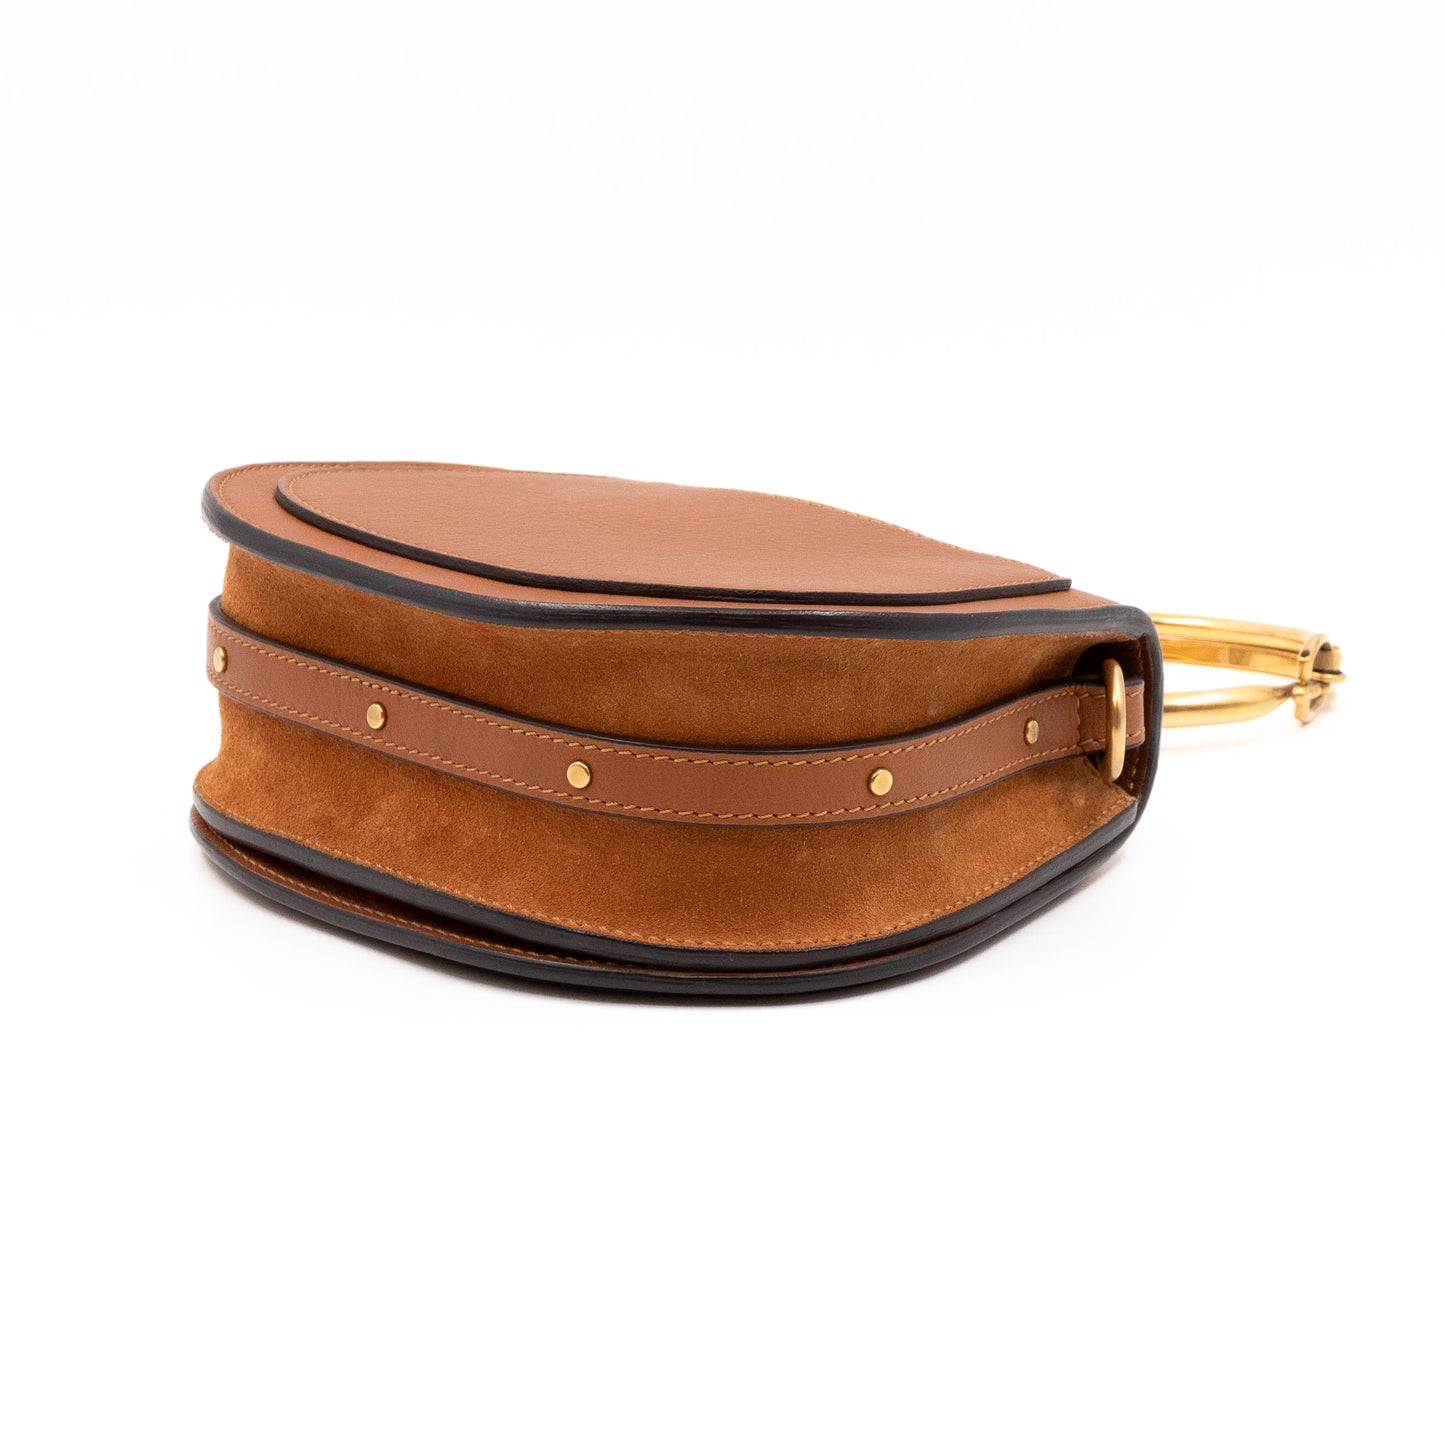 Small Nile Bracelet Bag Brown Leather